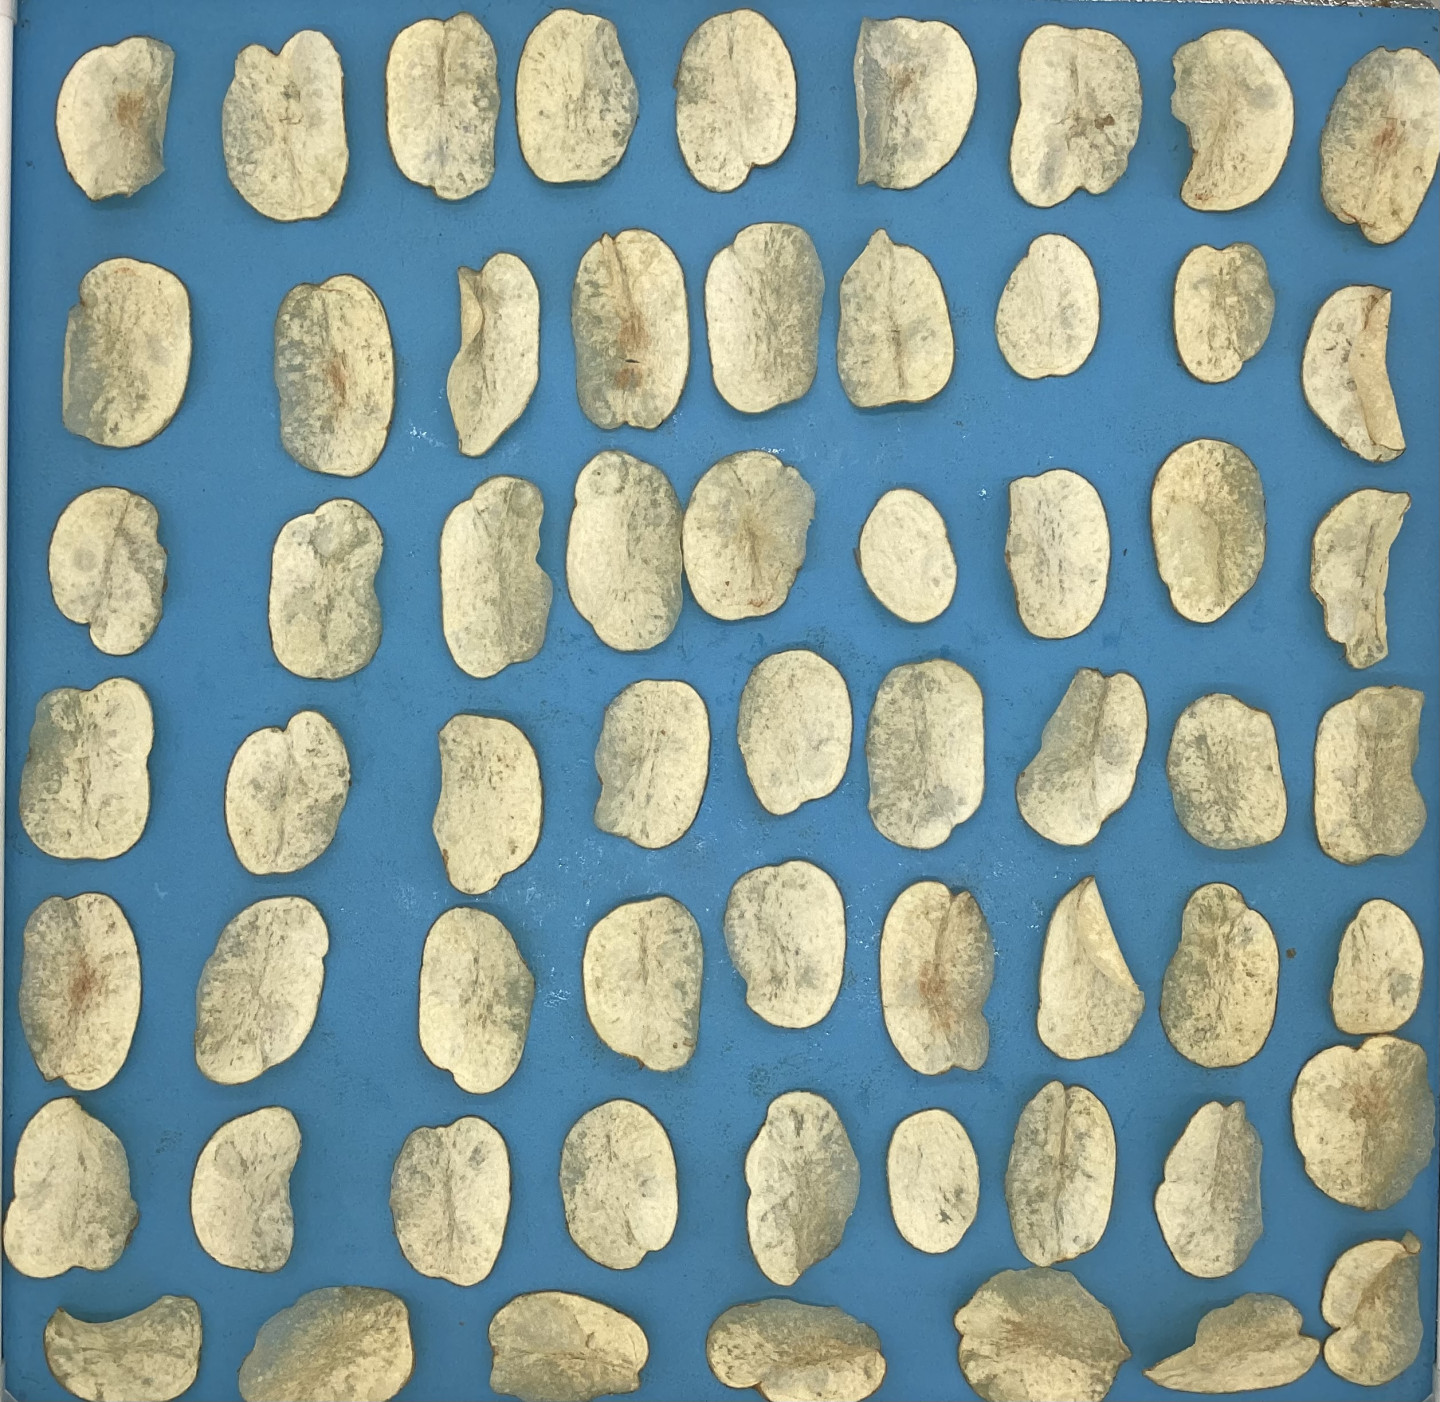 A top view of chips on a blue table.